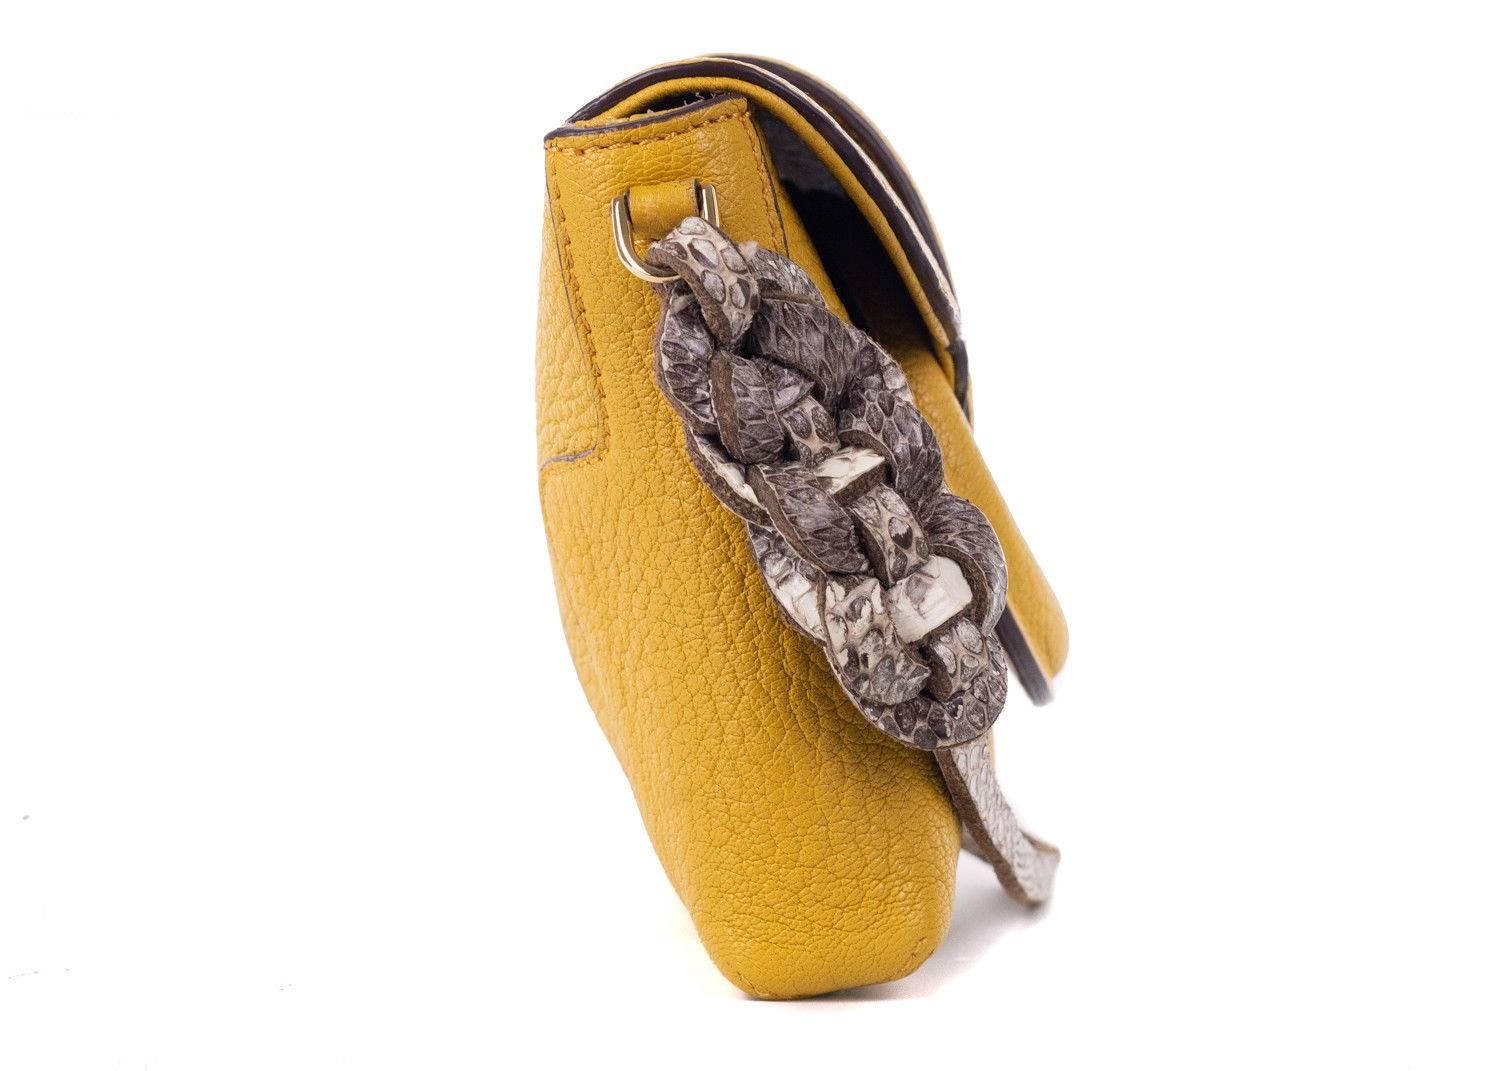 Roberto Cavalli mustard yellow clutch. This clutch features a unique mustard yellow color tone with a snake embossed braided wrsitlet and grained leather textile. Perfect for the incoming summer season, this bag is great to pair with simple denim